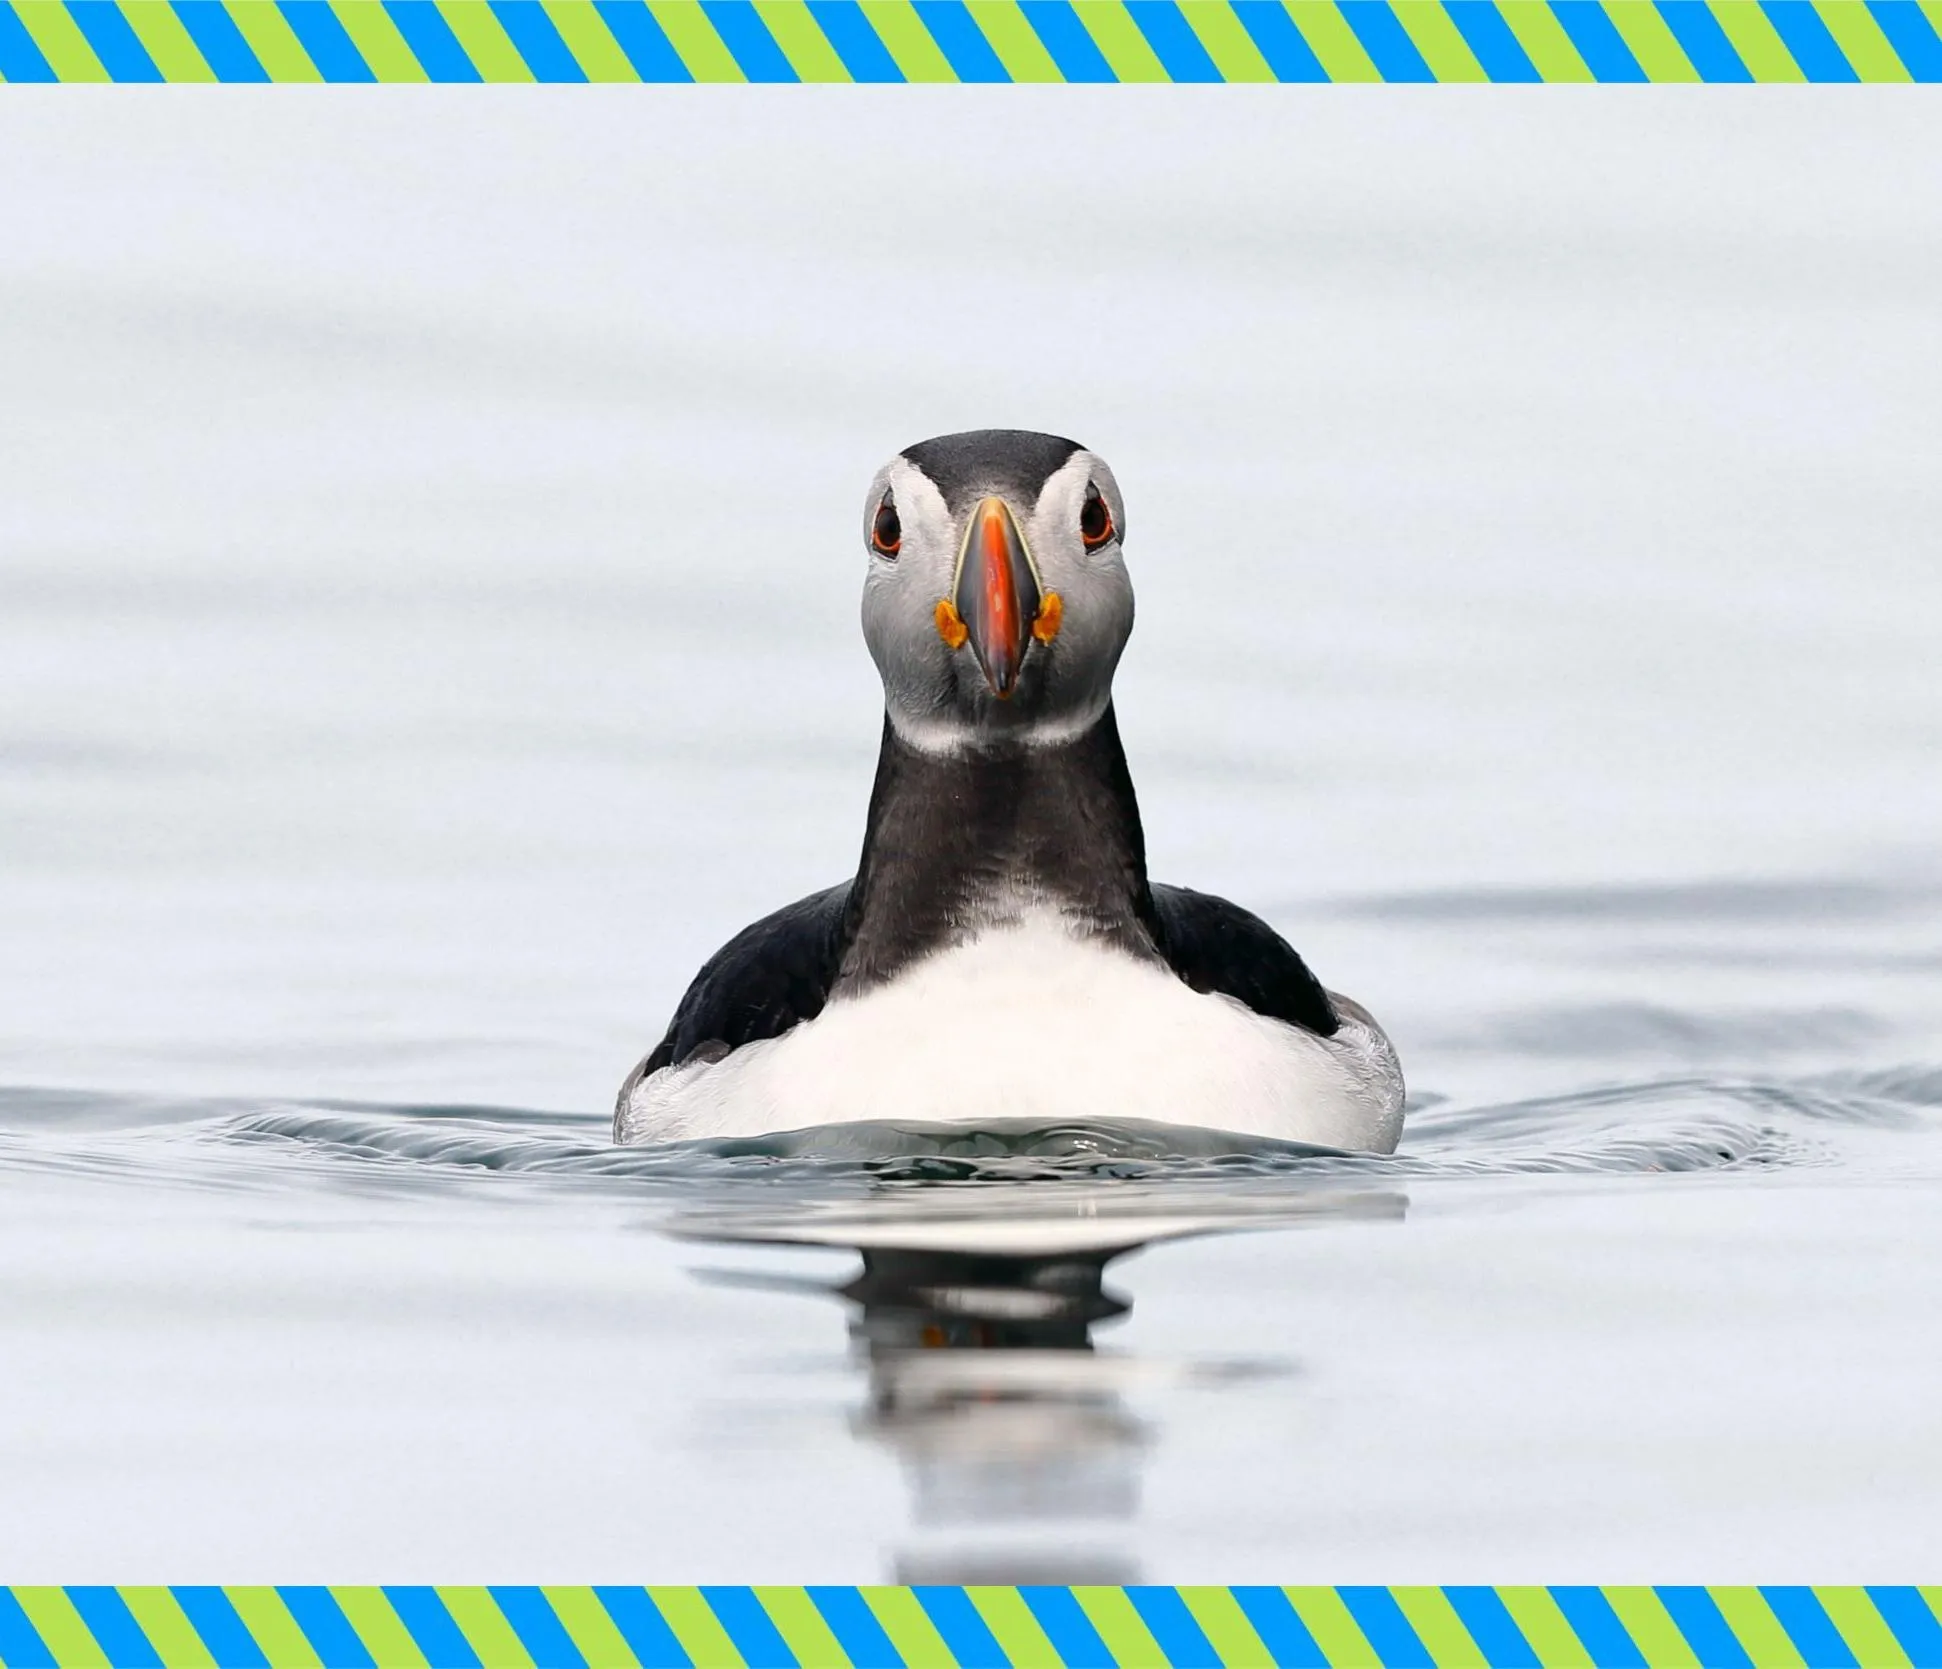 A Puffin, floating on water and looking directly towards the camera